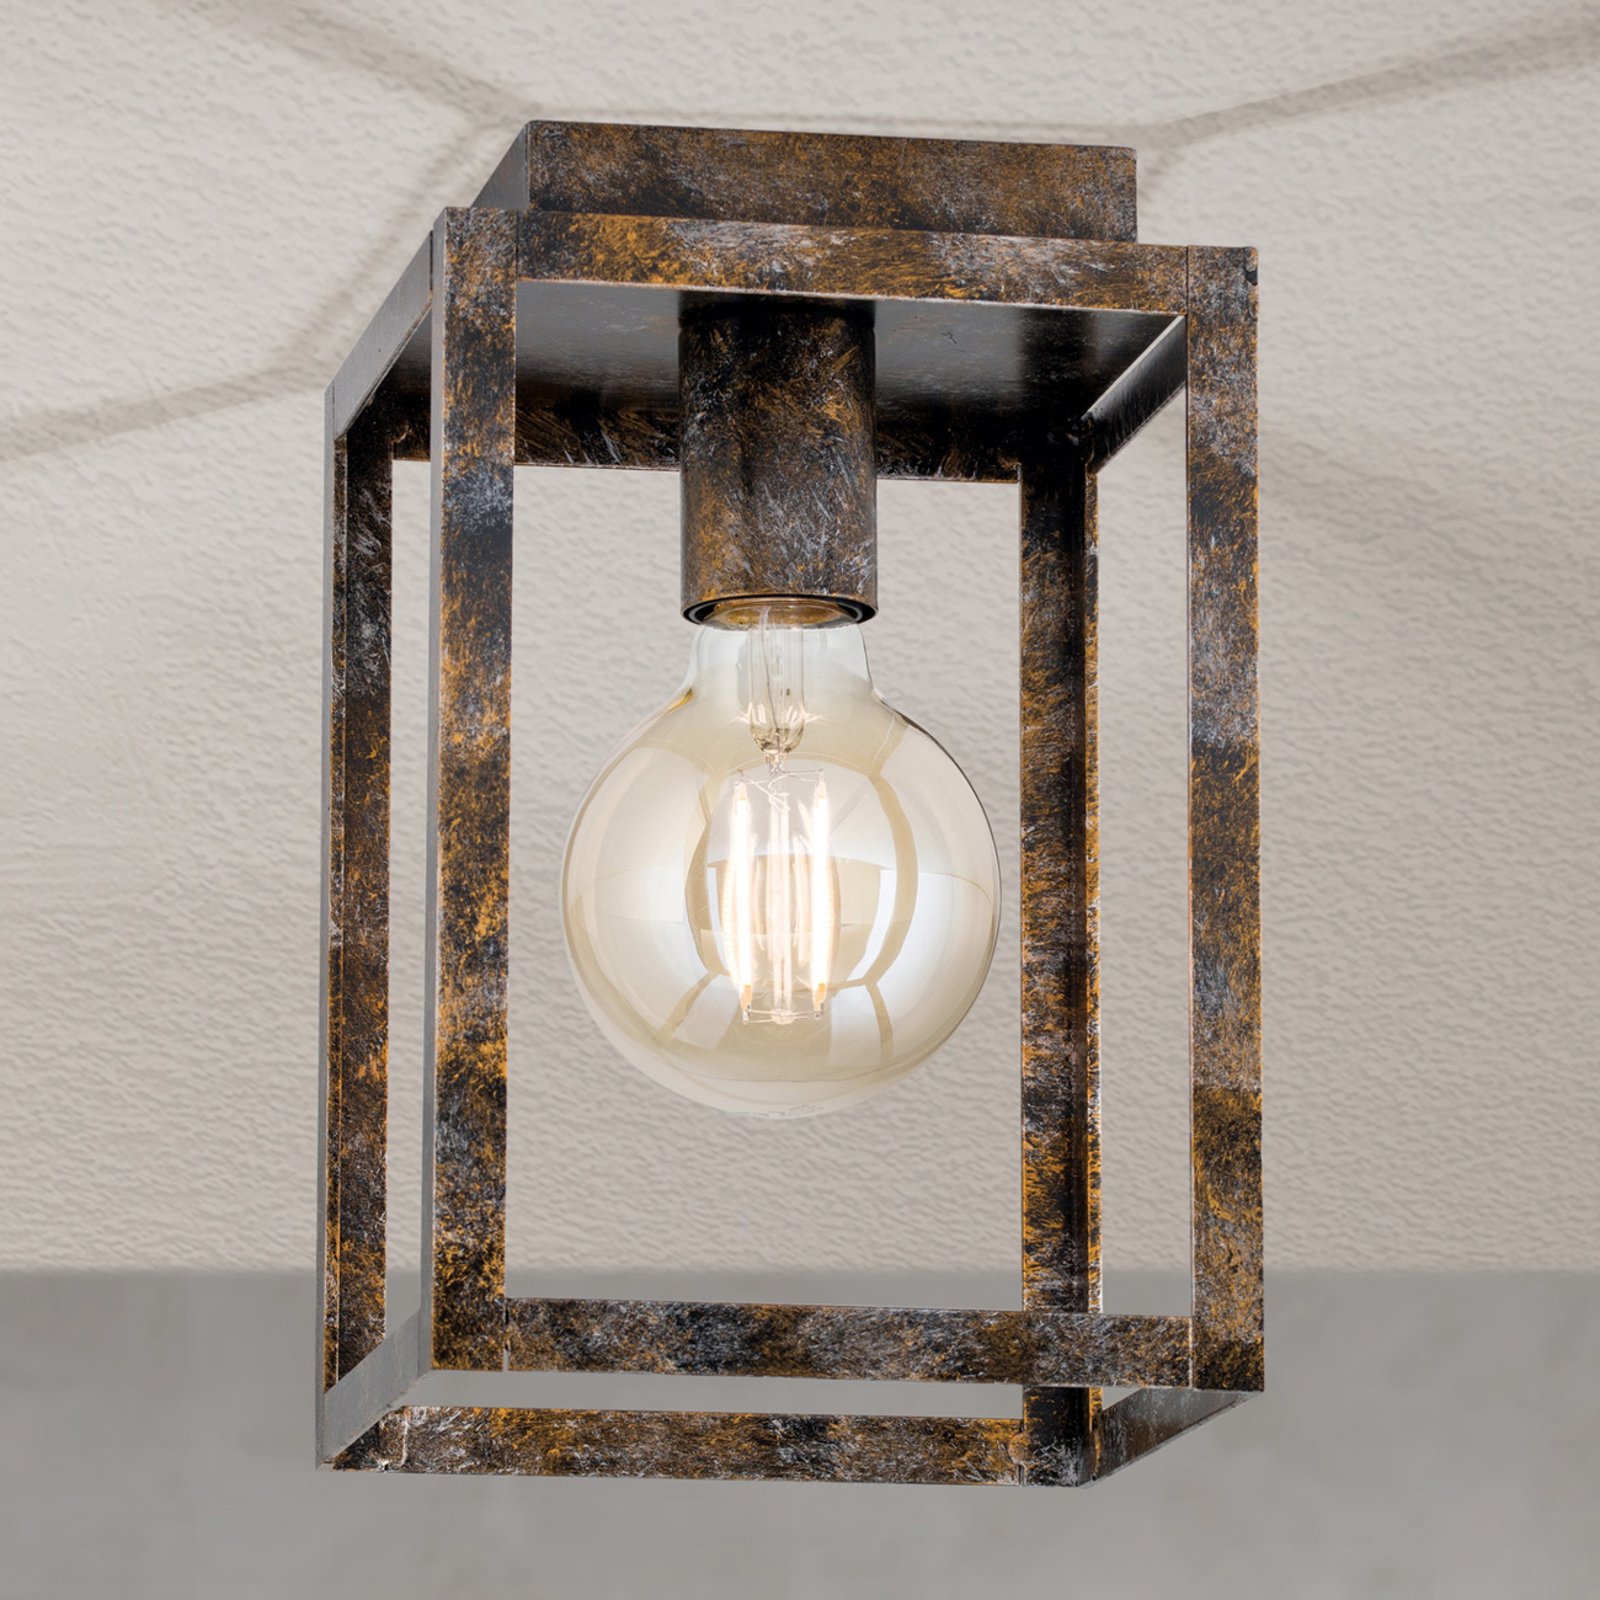 Cage ceiling light in a vintage look